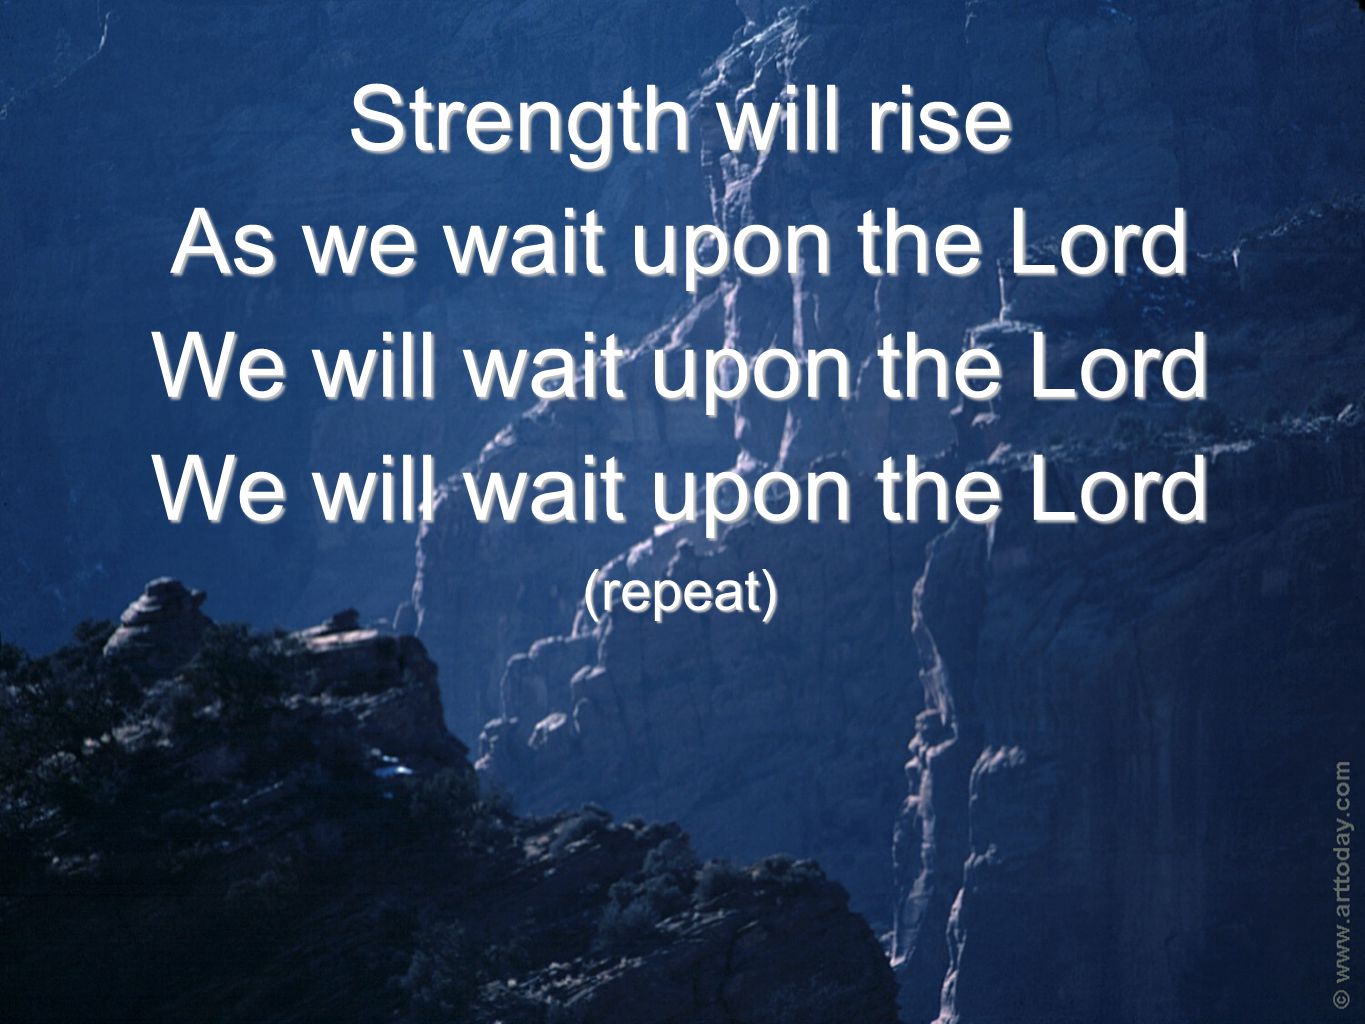 Strength will rise As we wait upon the Lord We will wait upon the Lord (repeat)